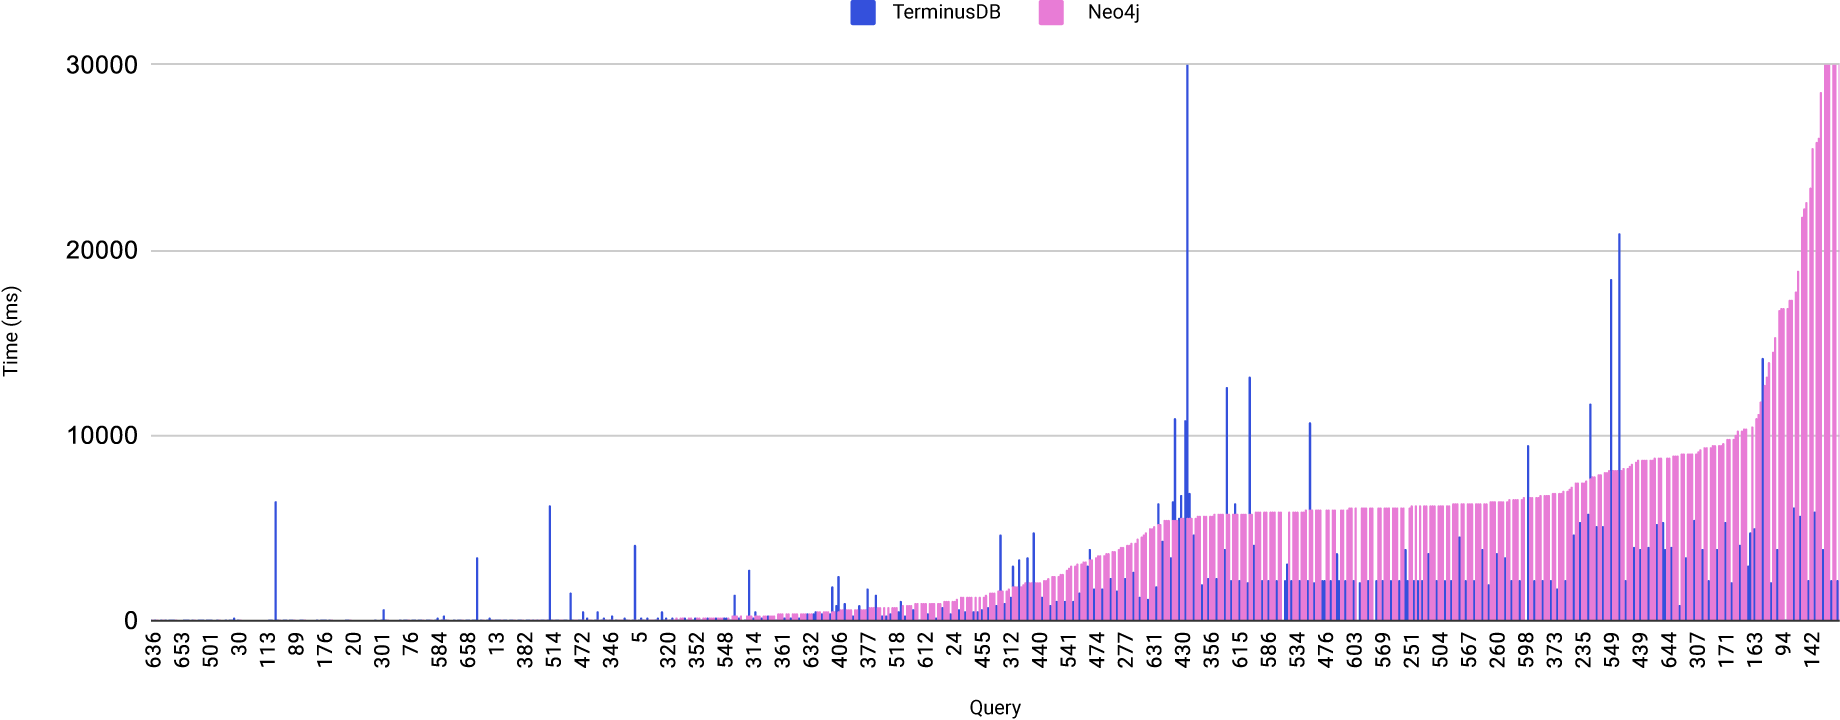 Neo4j vs TerminusDB - Single Hop Queries Graph Database Benchmark figures sorted by Neo4j